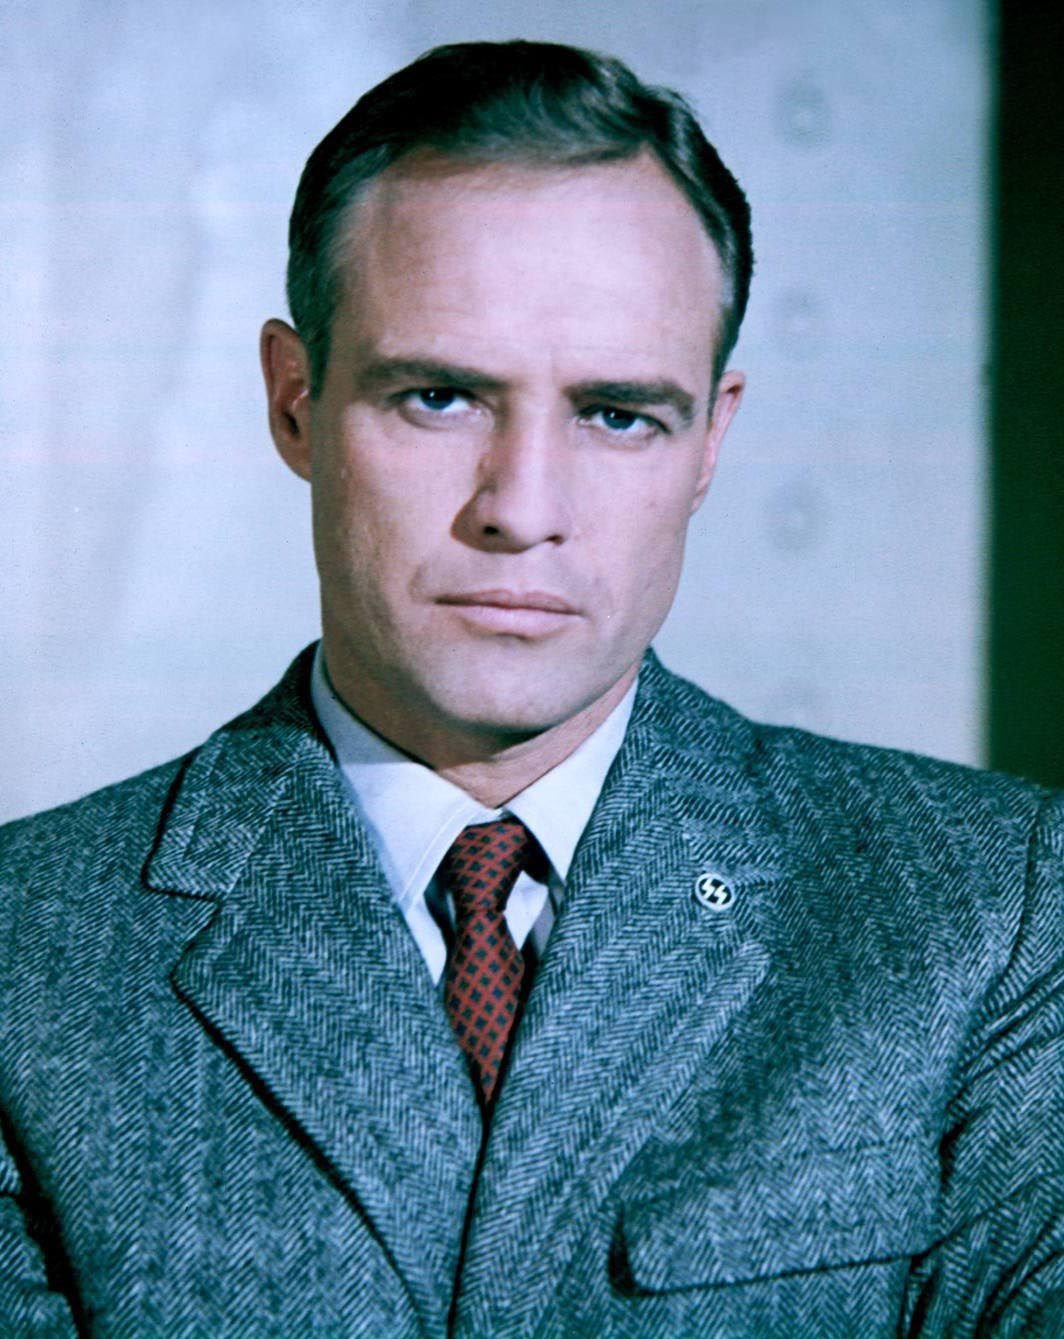 Publicity shot of Marlon Brando in 1967 | Source: Getty Images